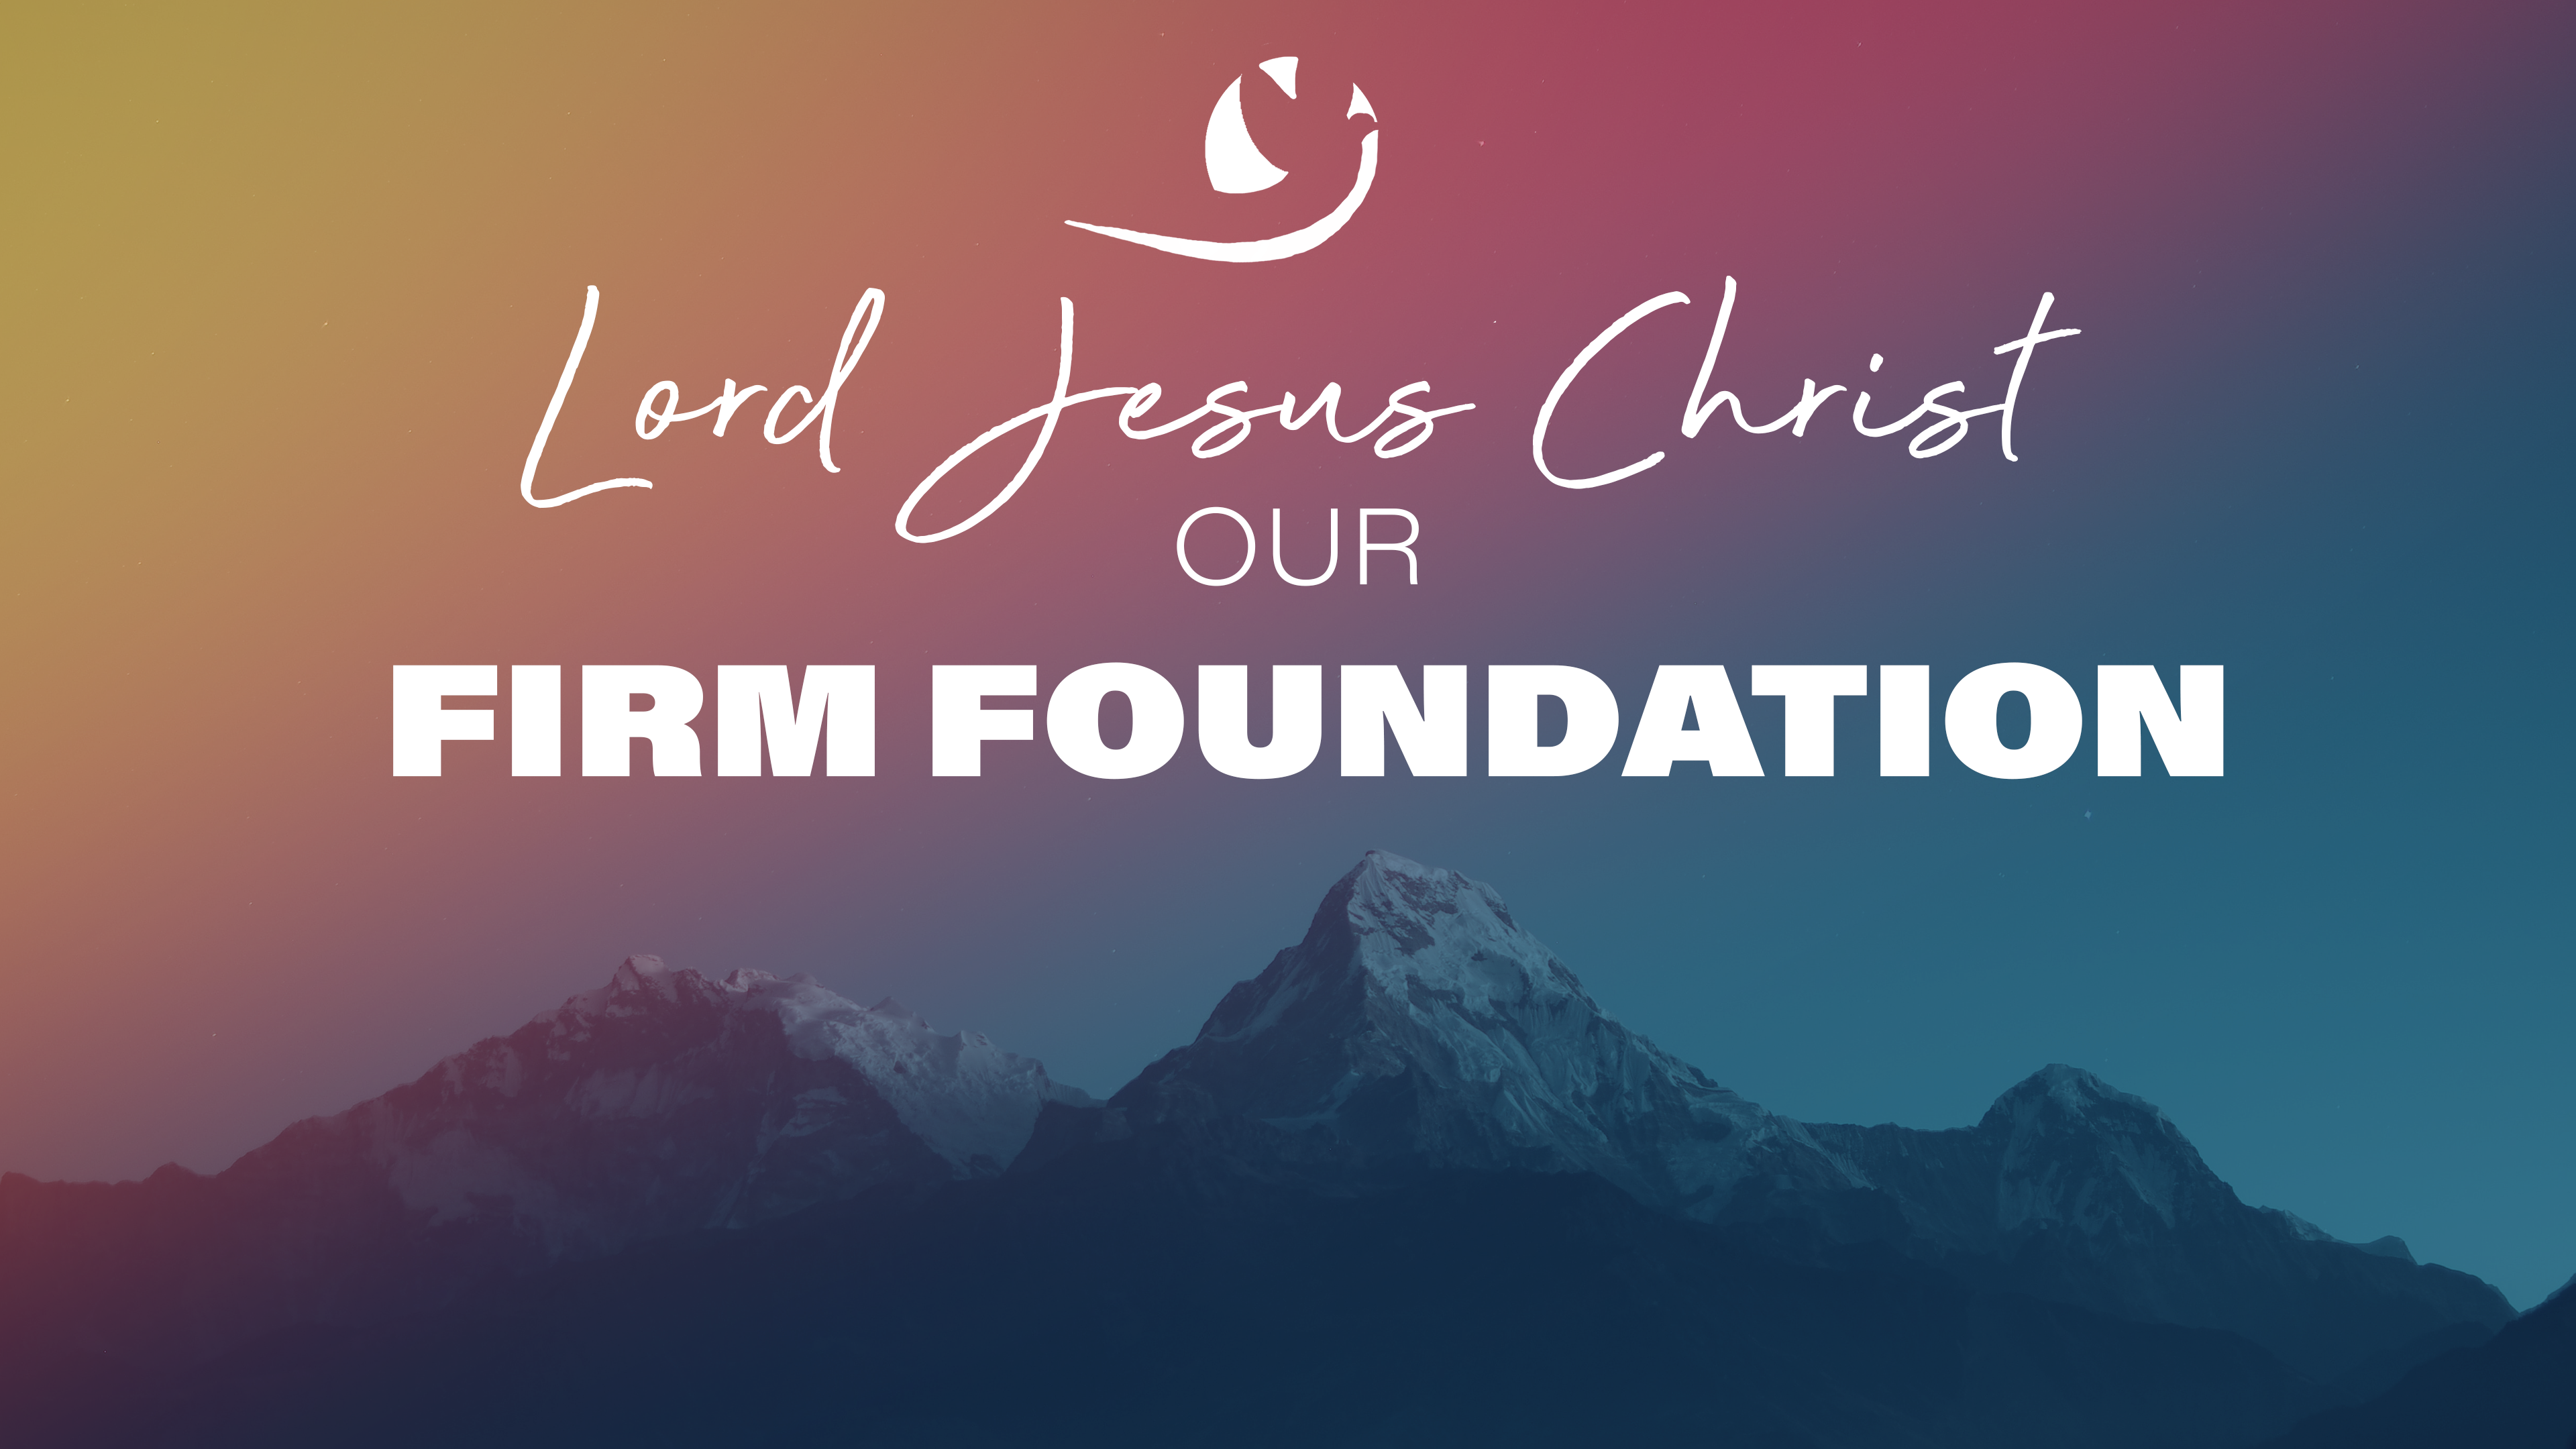 Jesus Christ our Firm Foundation